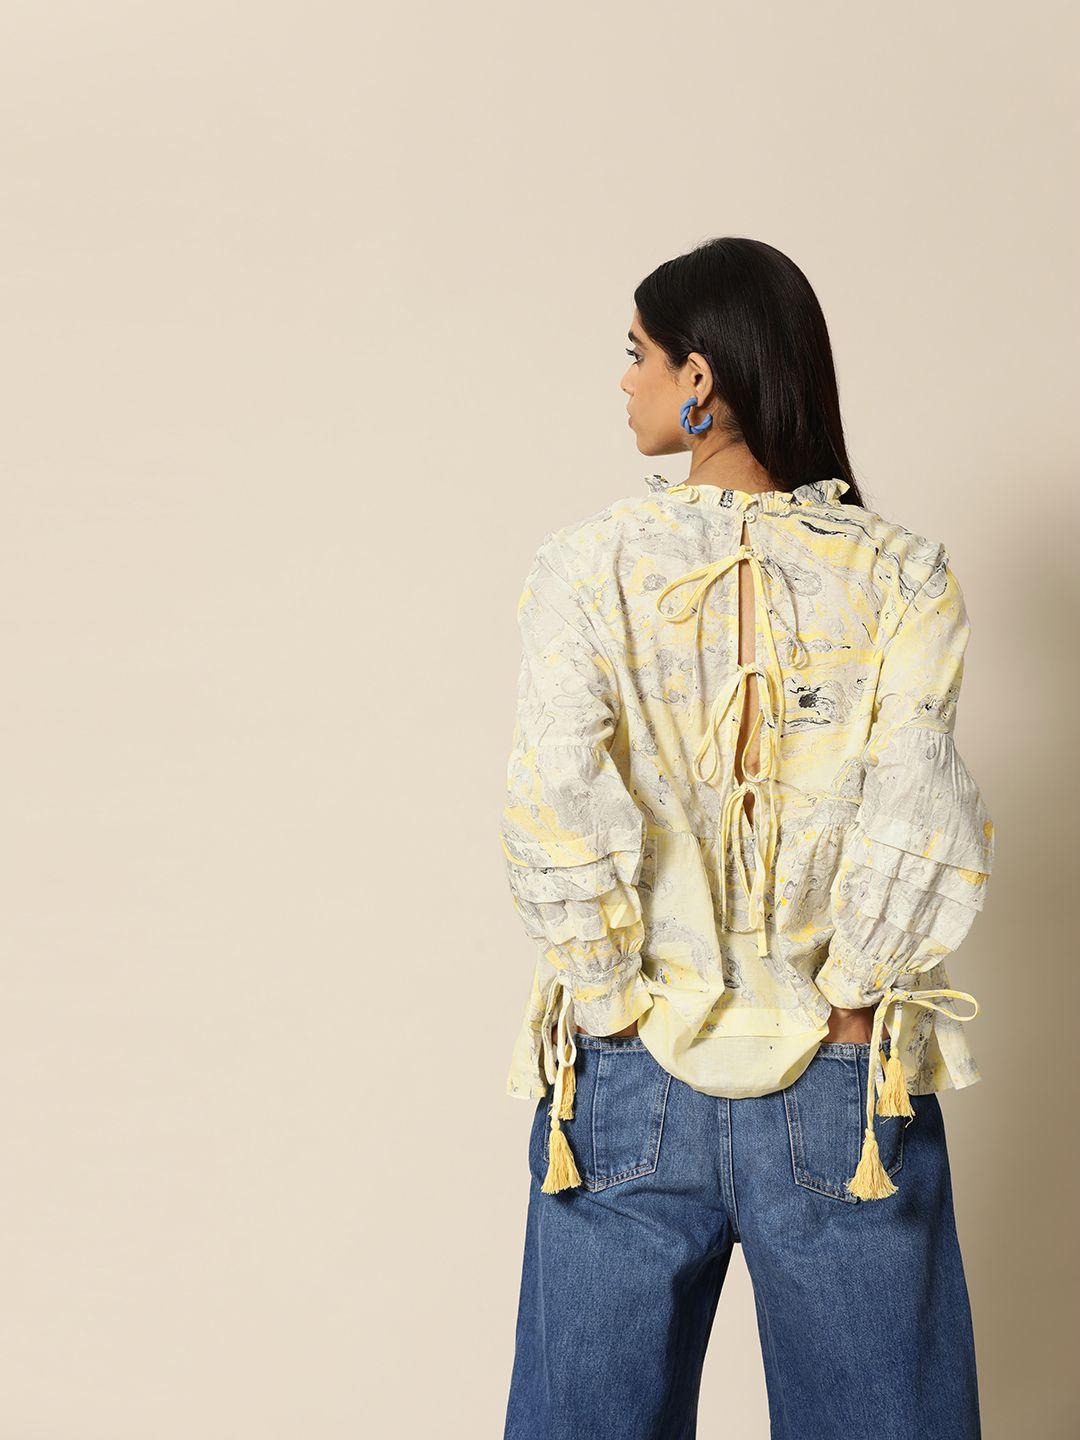 bower yellow marbling printed pure cotton extended sleeves longline top with tassels